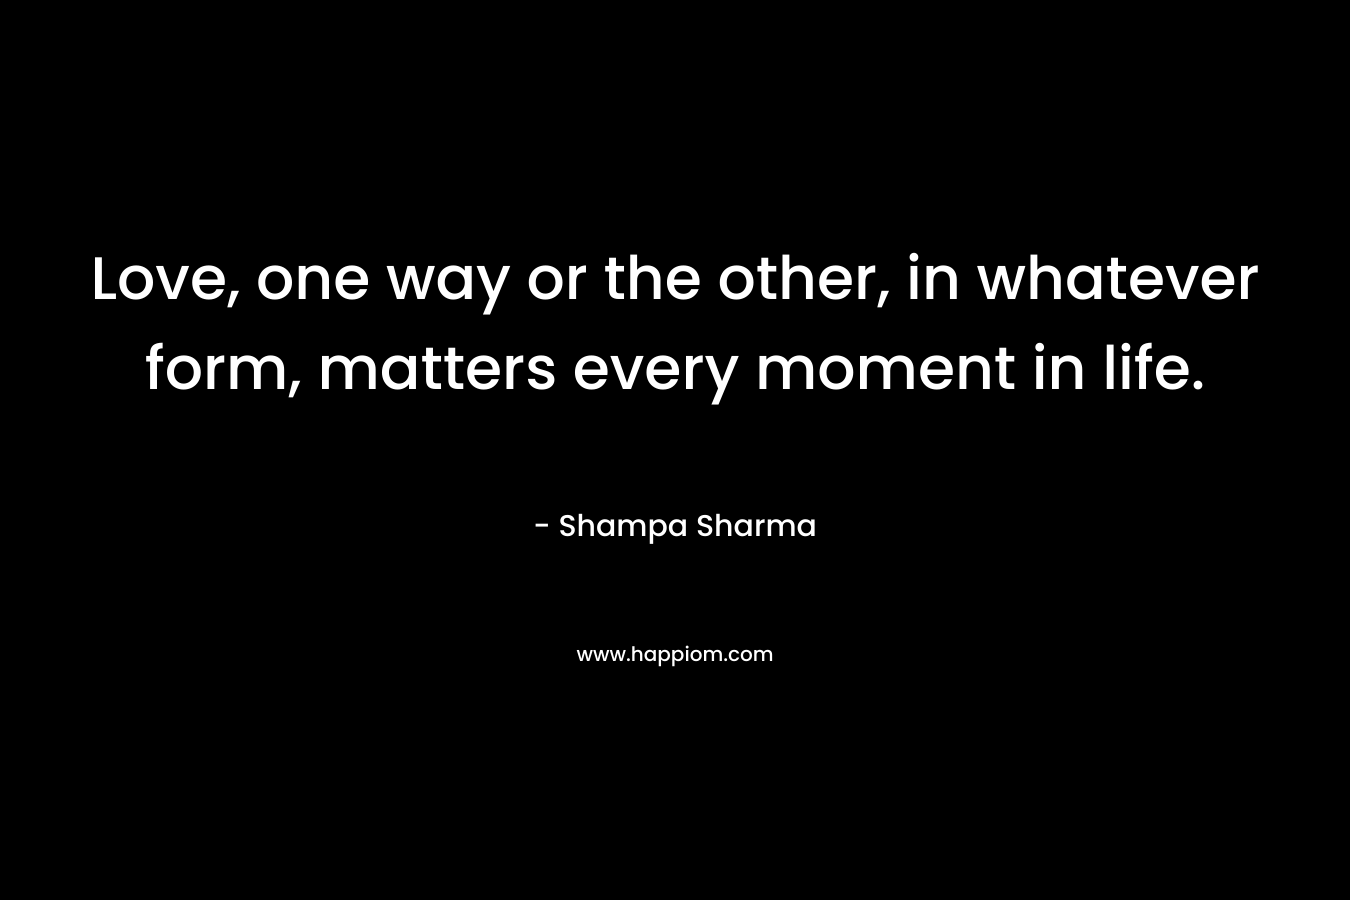 Love, one way or the other, in whatever form, matters every moment in life. – Shampa Sharma